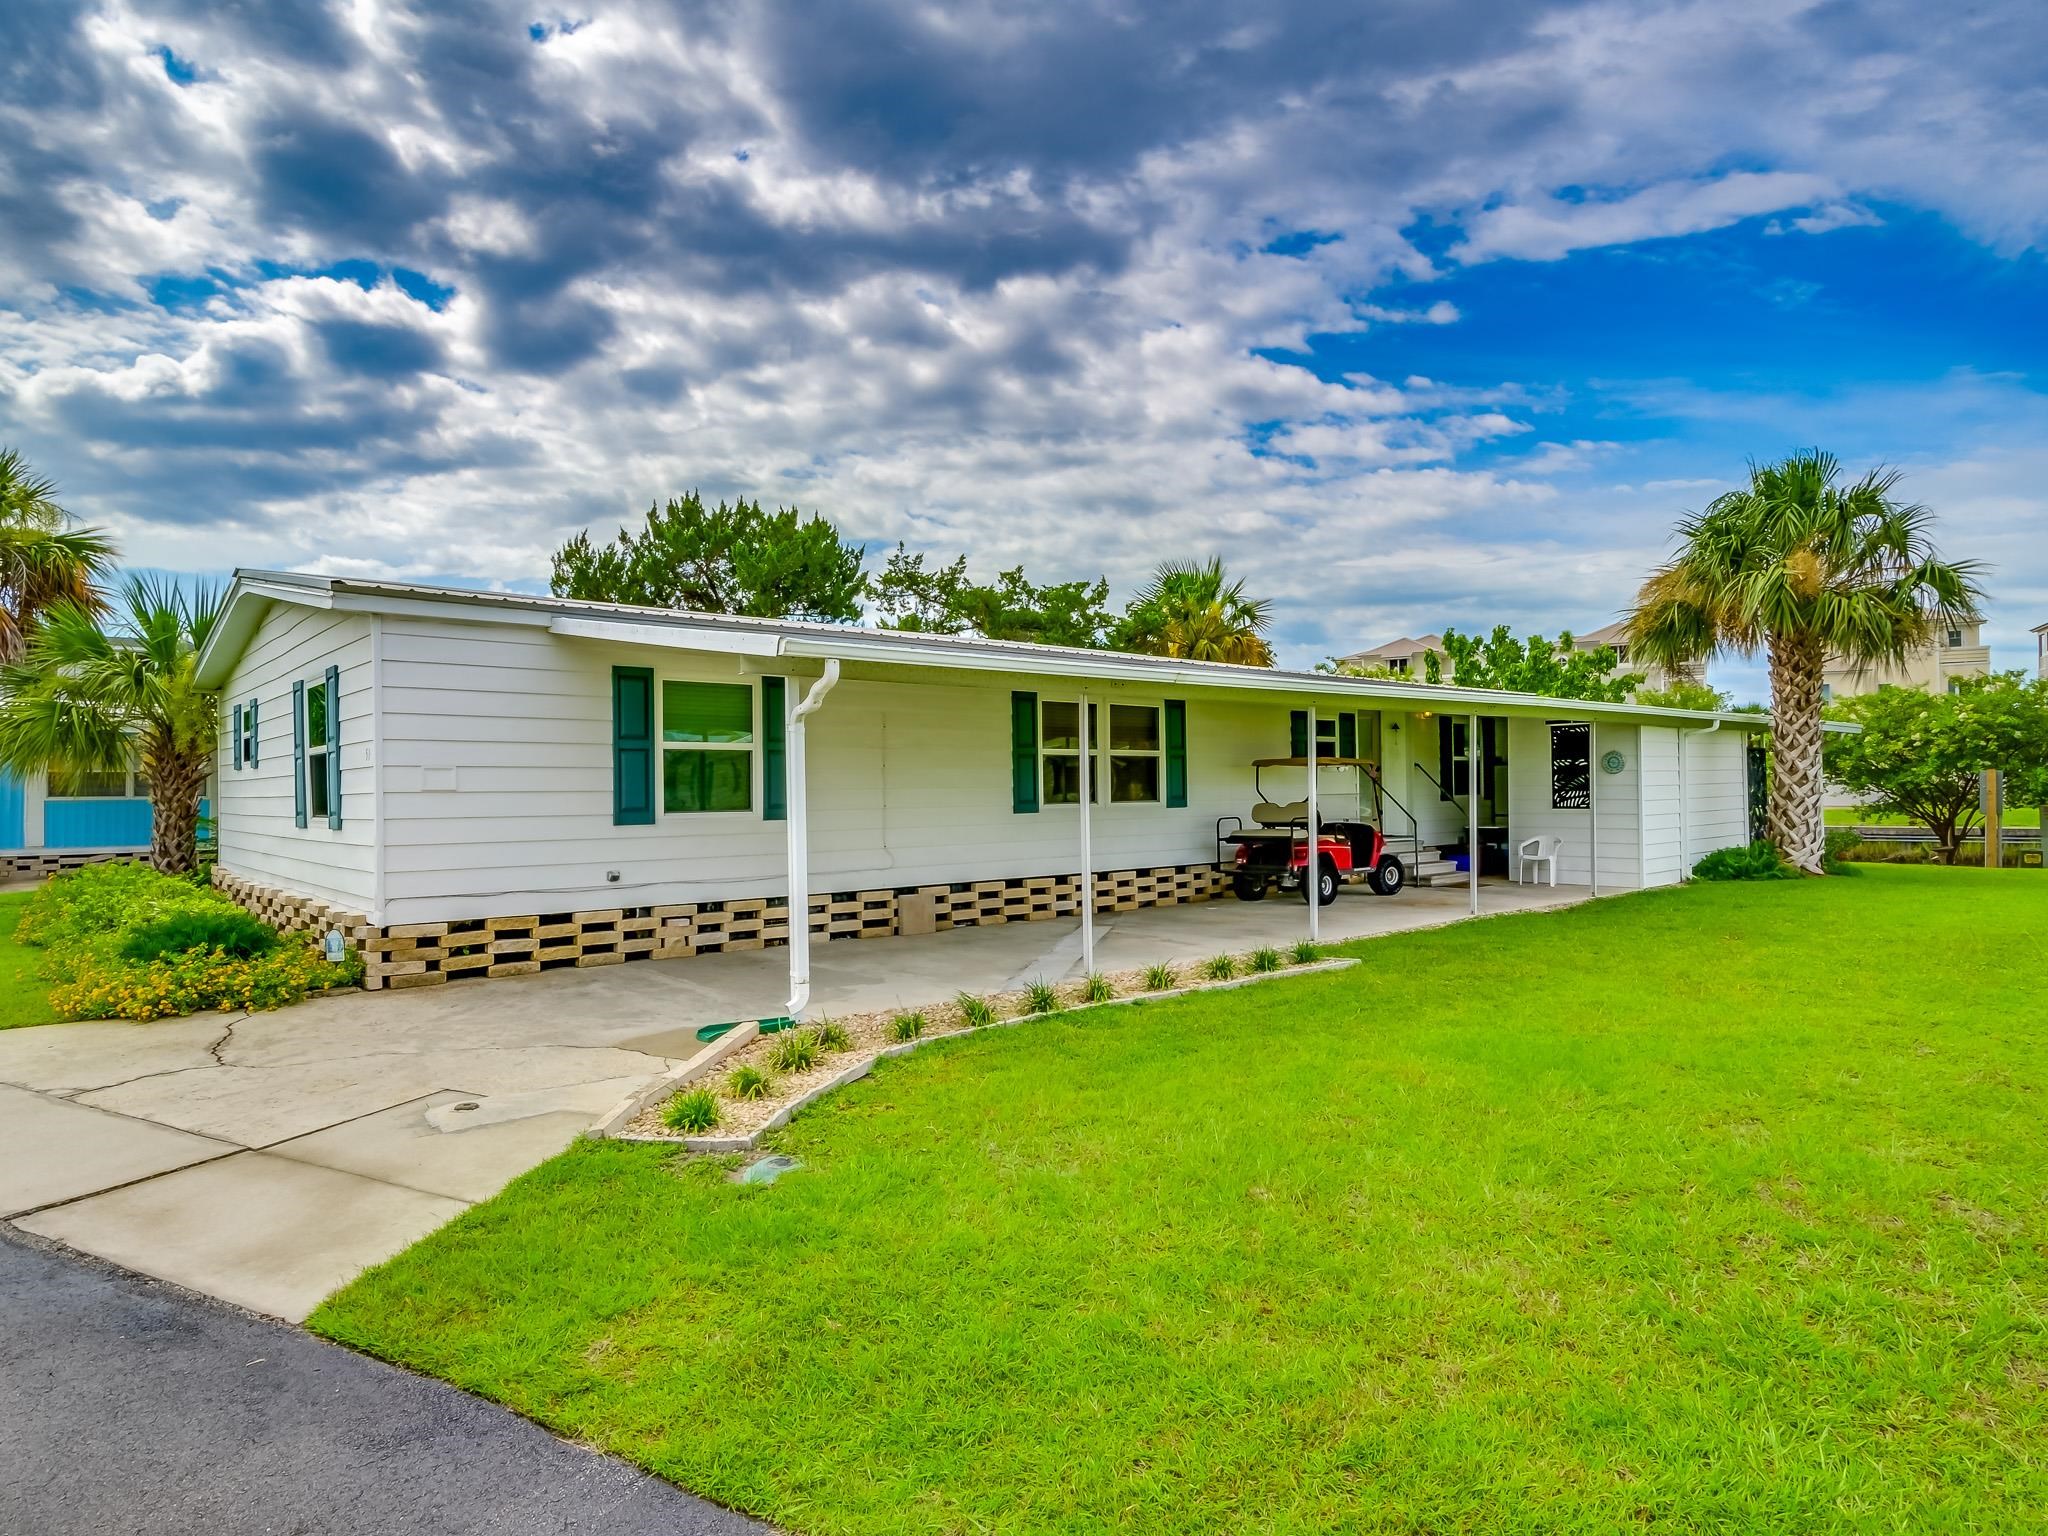 51 Janet Drive,SHELL POINT,Florida 32327,3 Bedrooms Bedrooms,2 BathroomsBathrooms,Manuf/mobile home,51 Janet Drive,361615